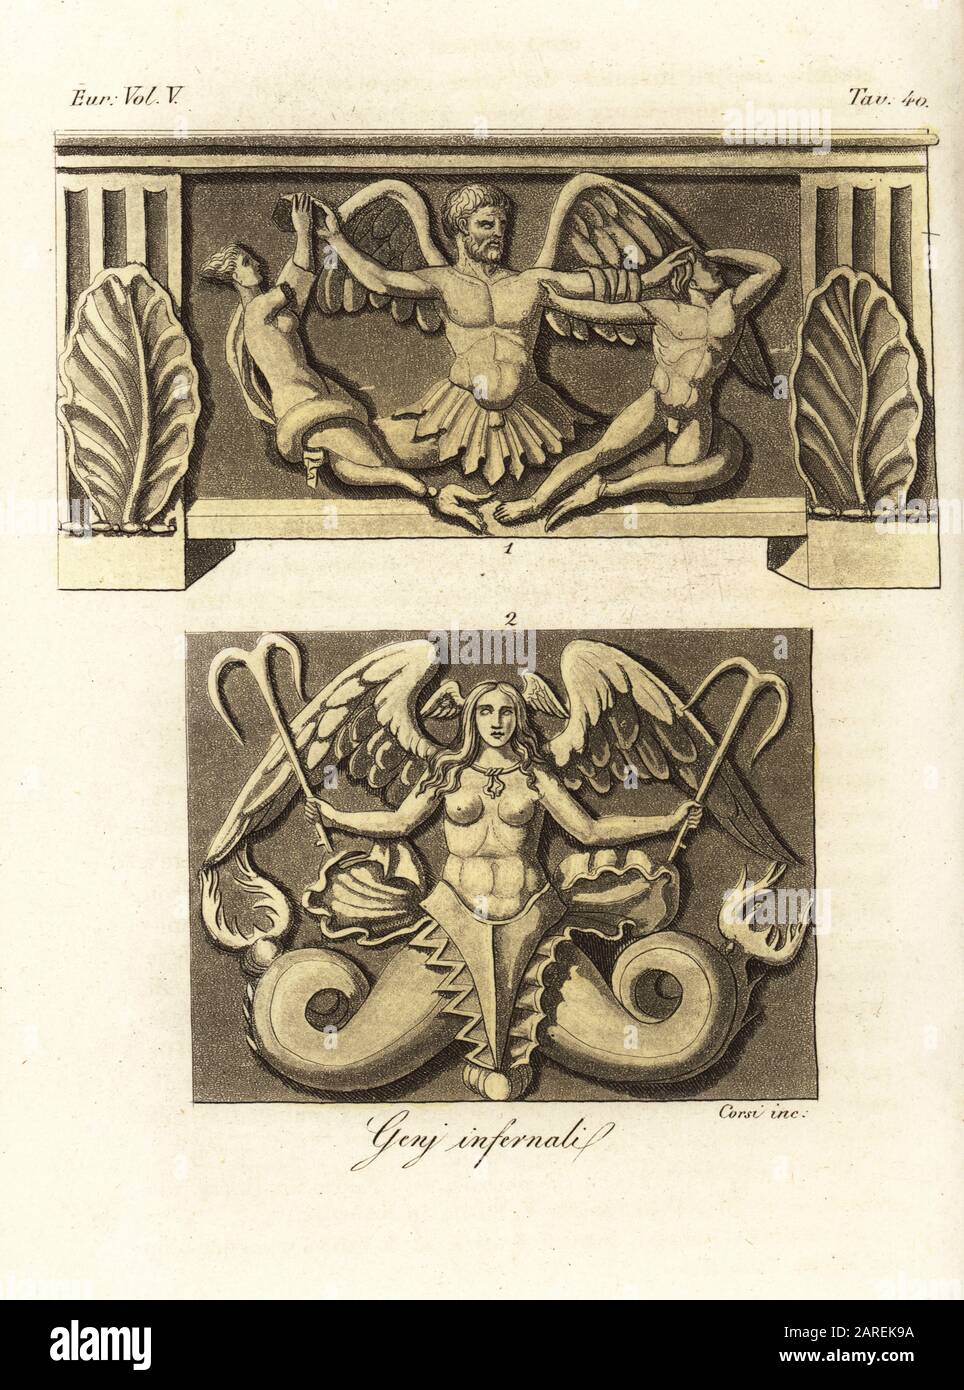 Ancient Etruscan chimera. A winged marine demon with fish tail limbs tormenting a man and woman 1, and Scylla an infernal winged mermaid with giant hooks 2. Geni infernali. Handcoloured copperplate engraving by Corsi from Giulio Ferrario’s Costumes Ancient and Modern of the Peoples of the World, Il Costume Antico e Moderno, Florence, 1843. Stock Photo